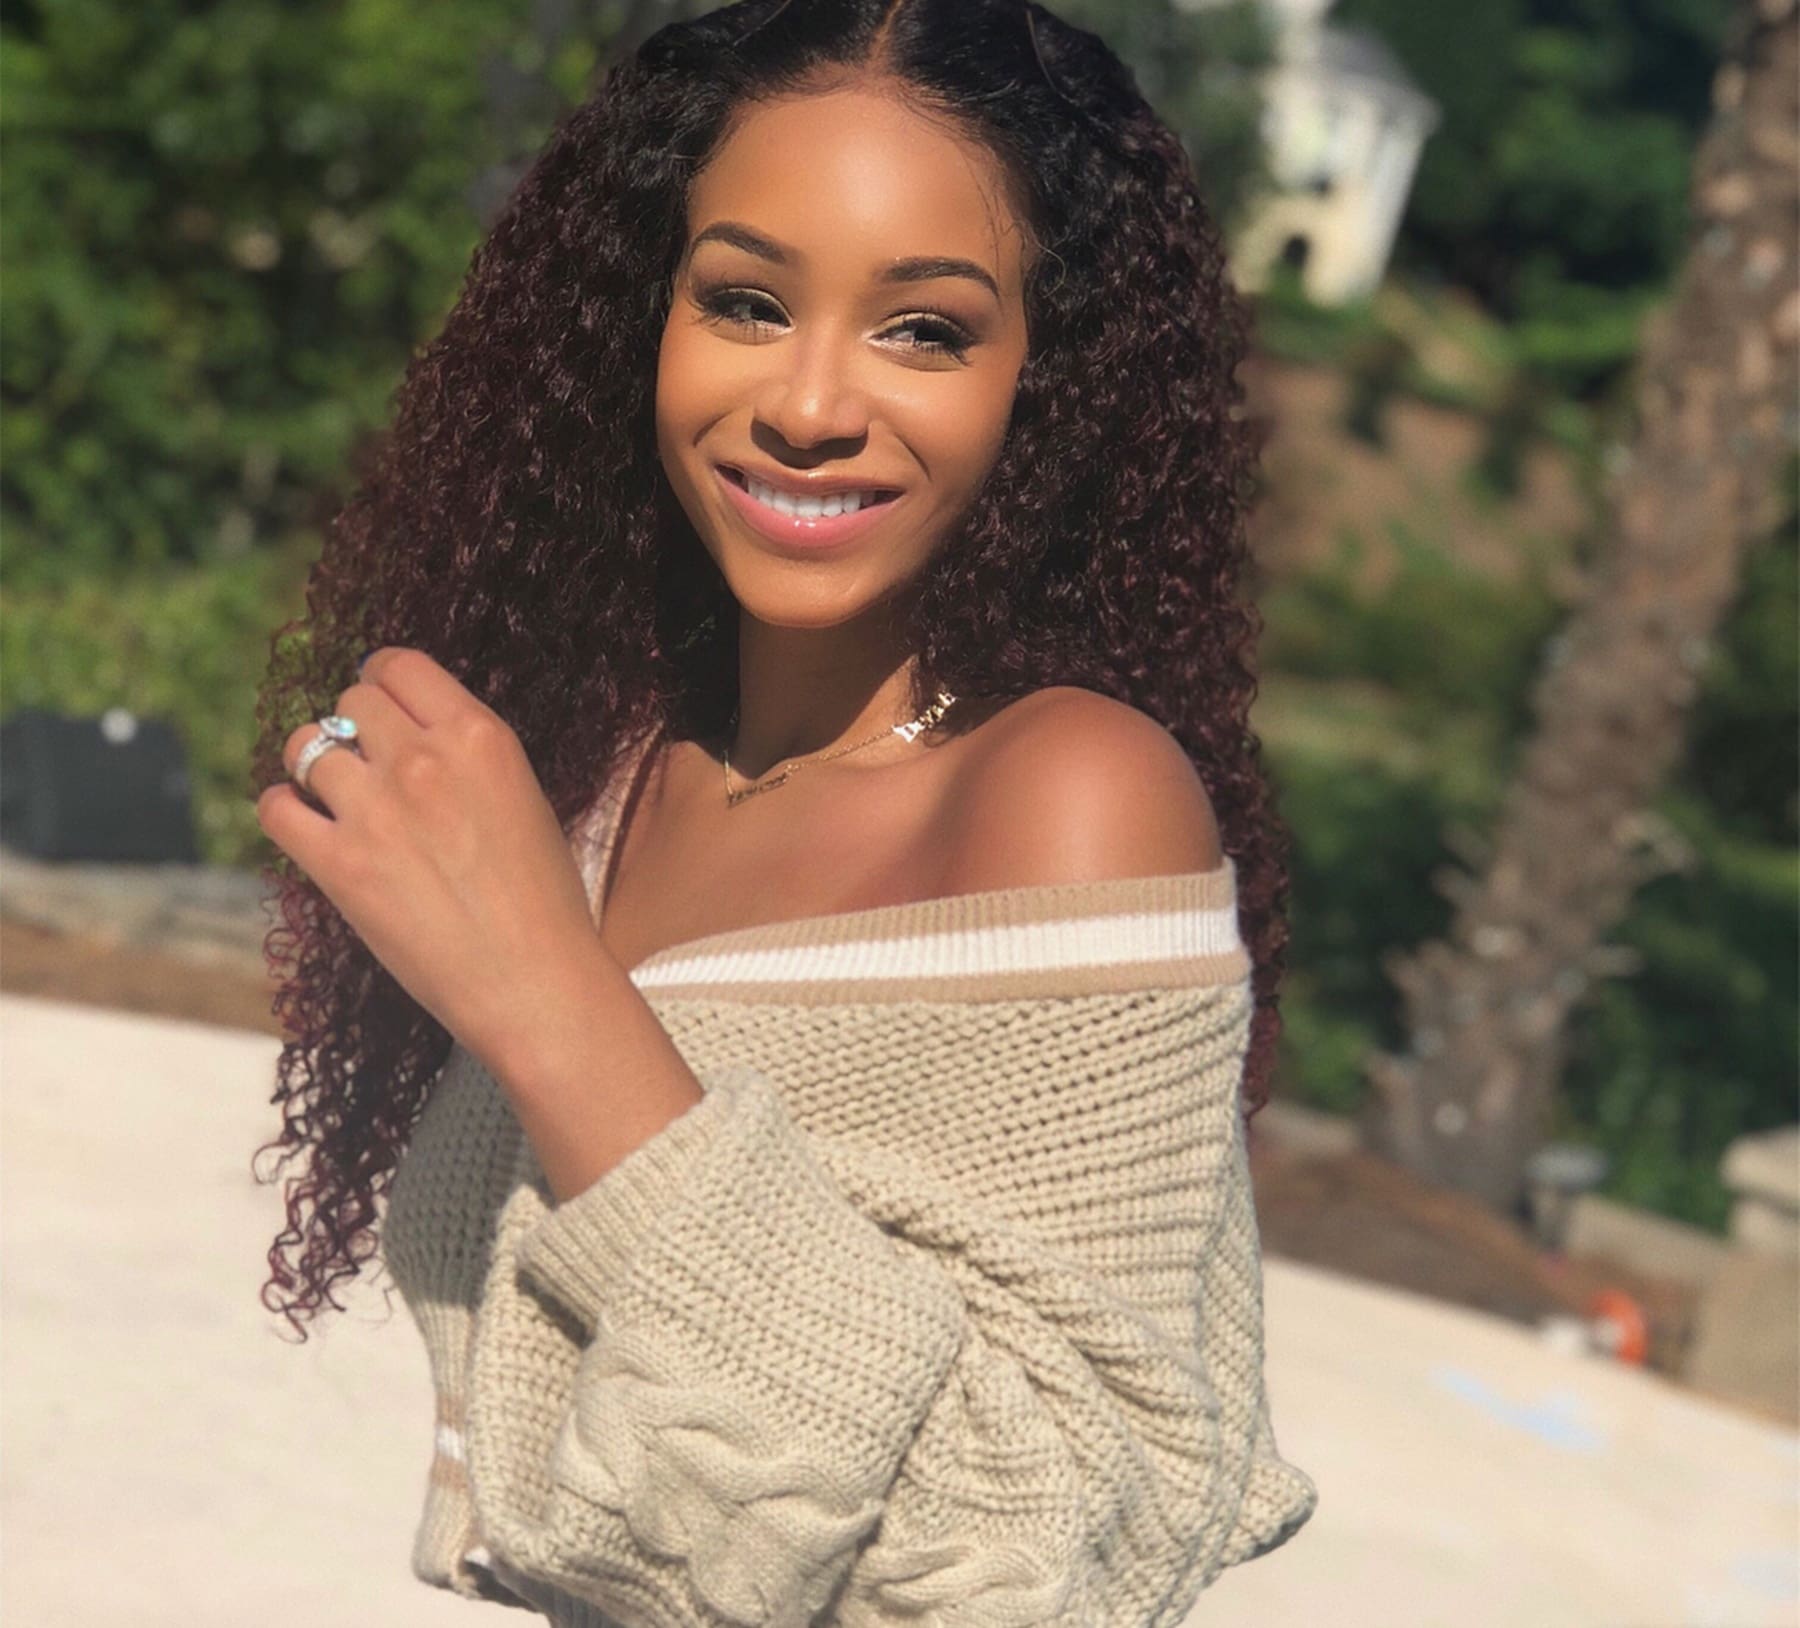 T.I.'s Daughter, Deyjah Harris Looks Stunning In Her Latest Pics - Check Out Her Curly Hair That Her Fans Simply Love